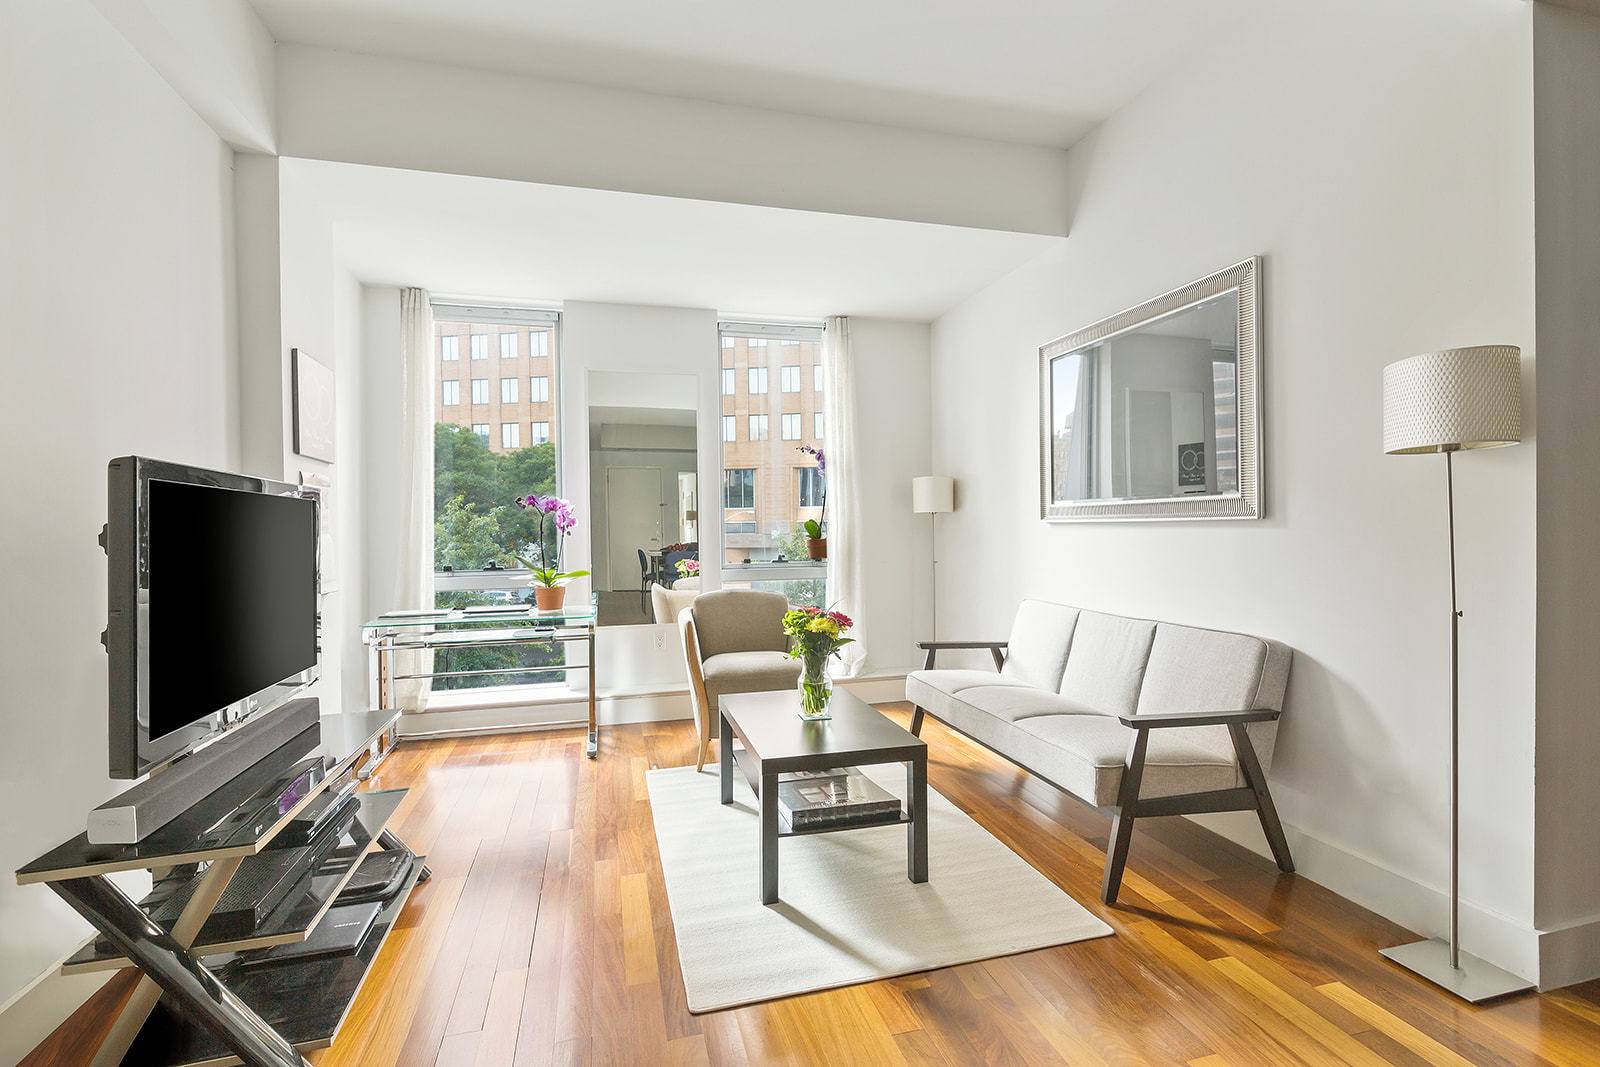 Beautiful and bright bedroom apartment in Downtown Brooklyn's premier full service condominium building, The Toren.